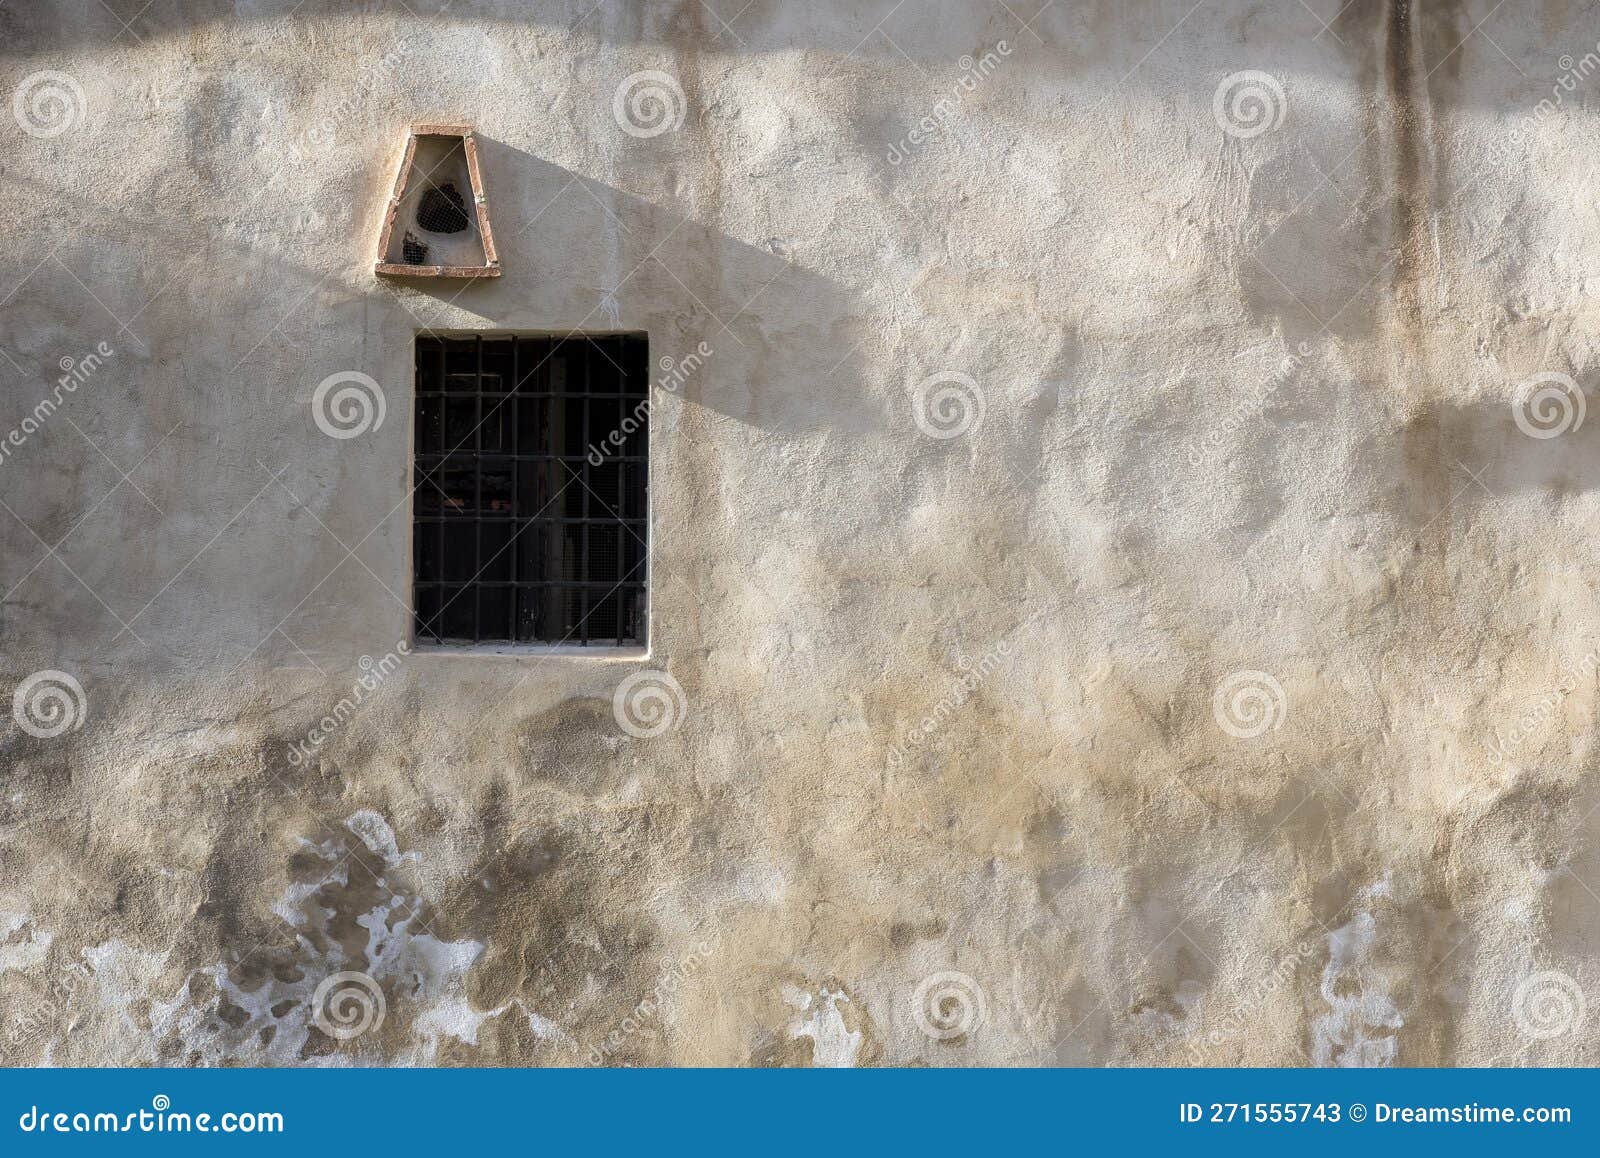 window in an old medieval wall